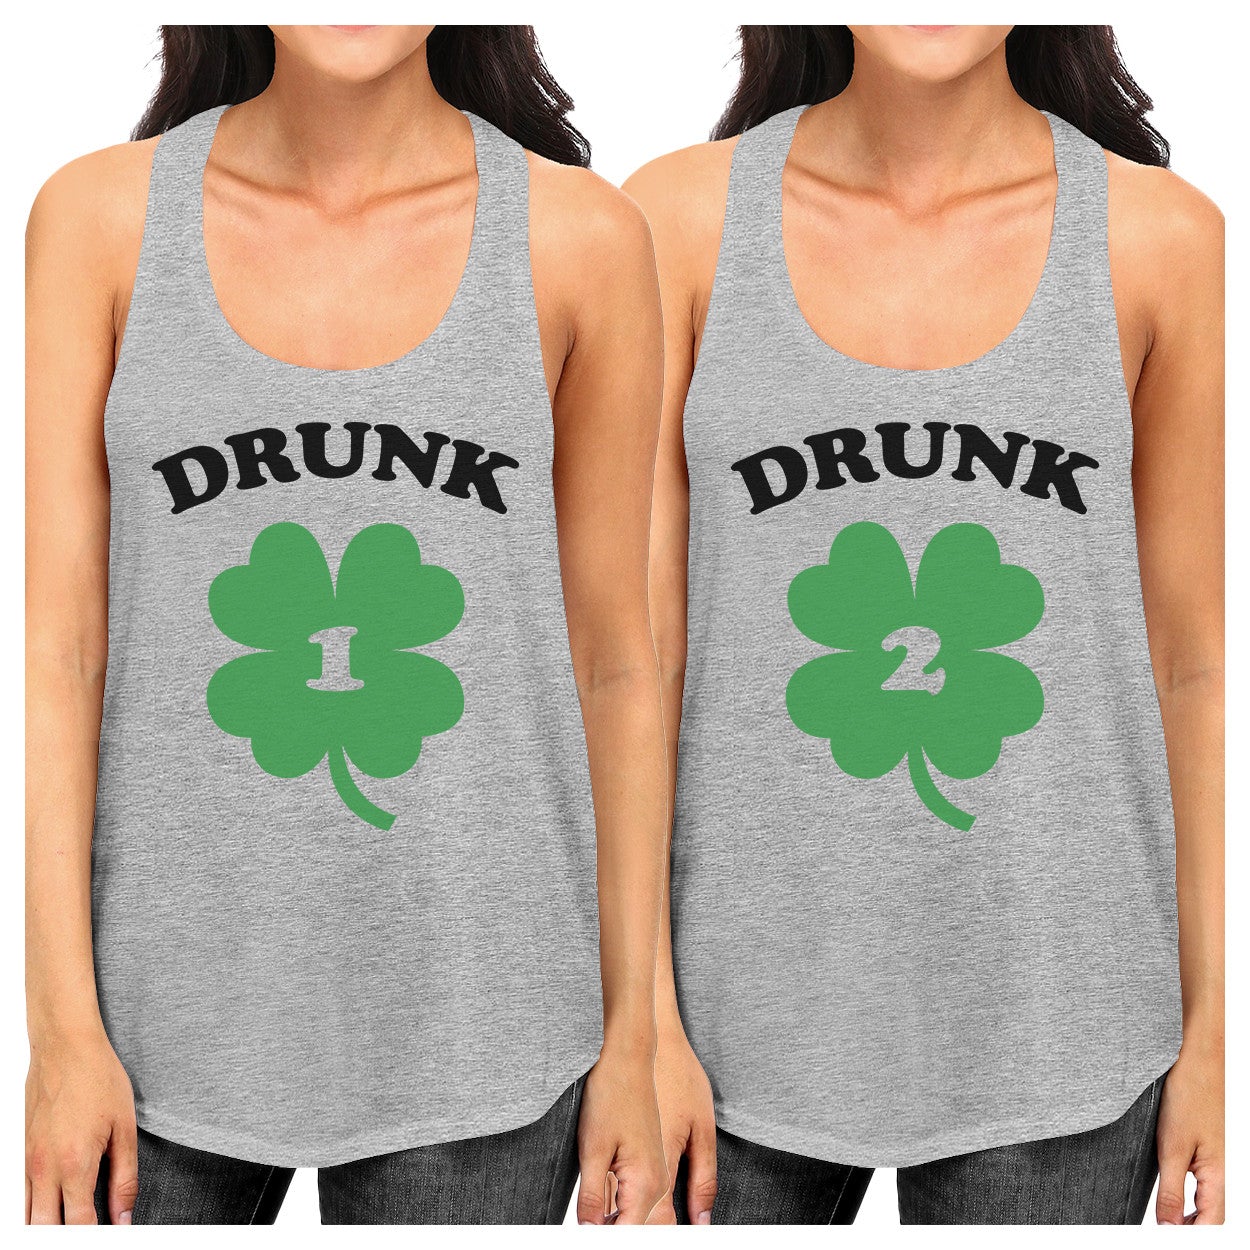 Drunk1 Drunk2 Best Friend Matching Tanks Gifts For St Patricks Day - 365 In Love